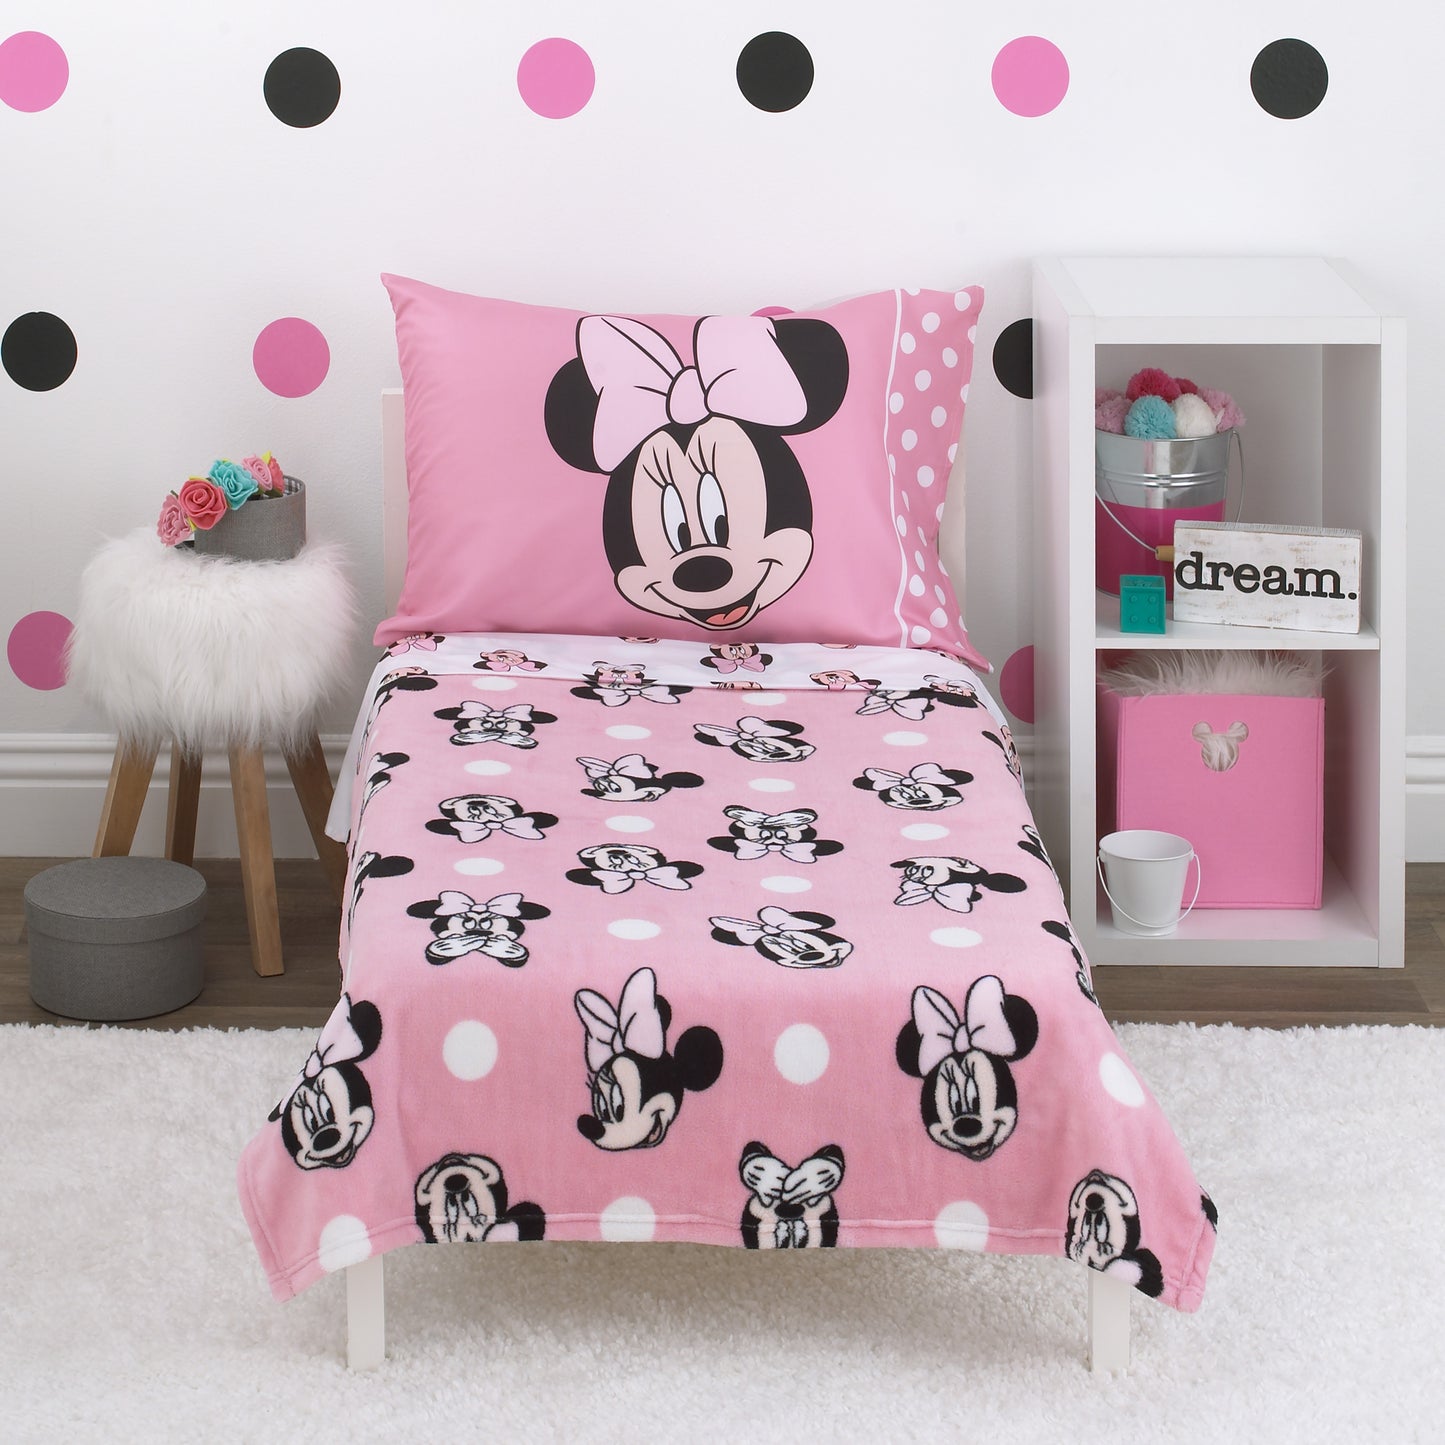 Disney Minnie Mouse - Blushing Minnie - 4 Piece Toddler Bed Set - Coral Fleece Toddler Blanket, Fitted Bottom Sheet, Flat Top Sheet, Standard Size Pillowcase